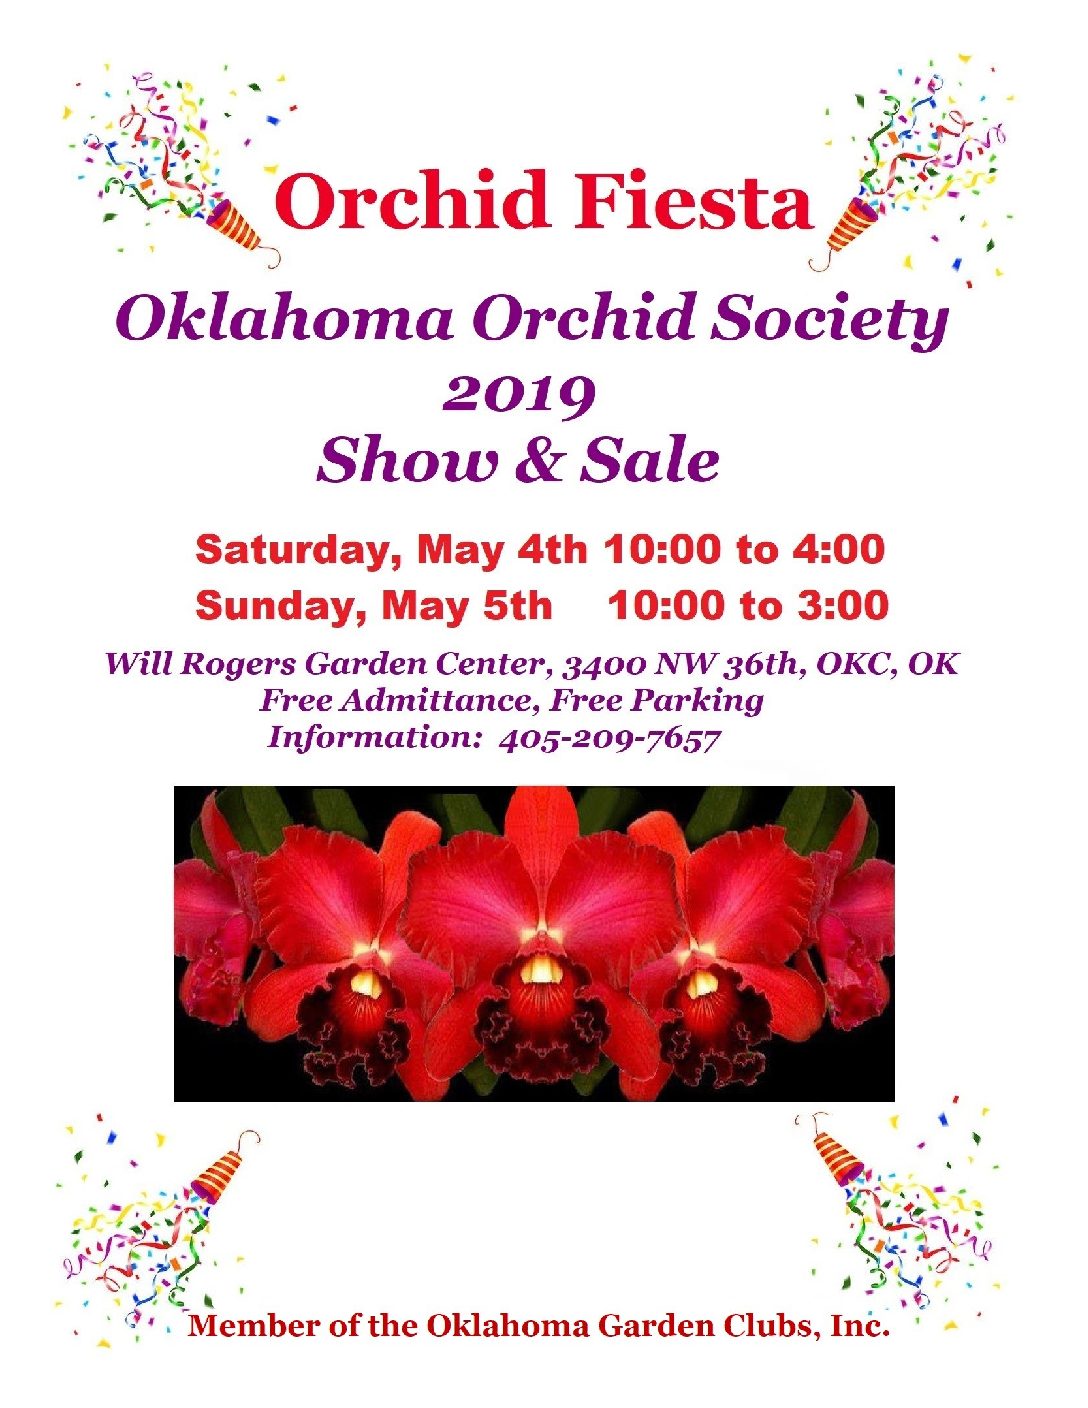 New Orleans Orchid Society's Show and Sale